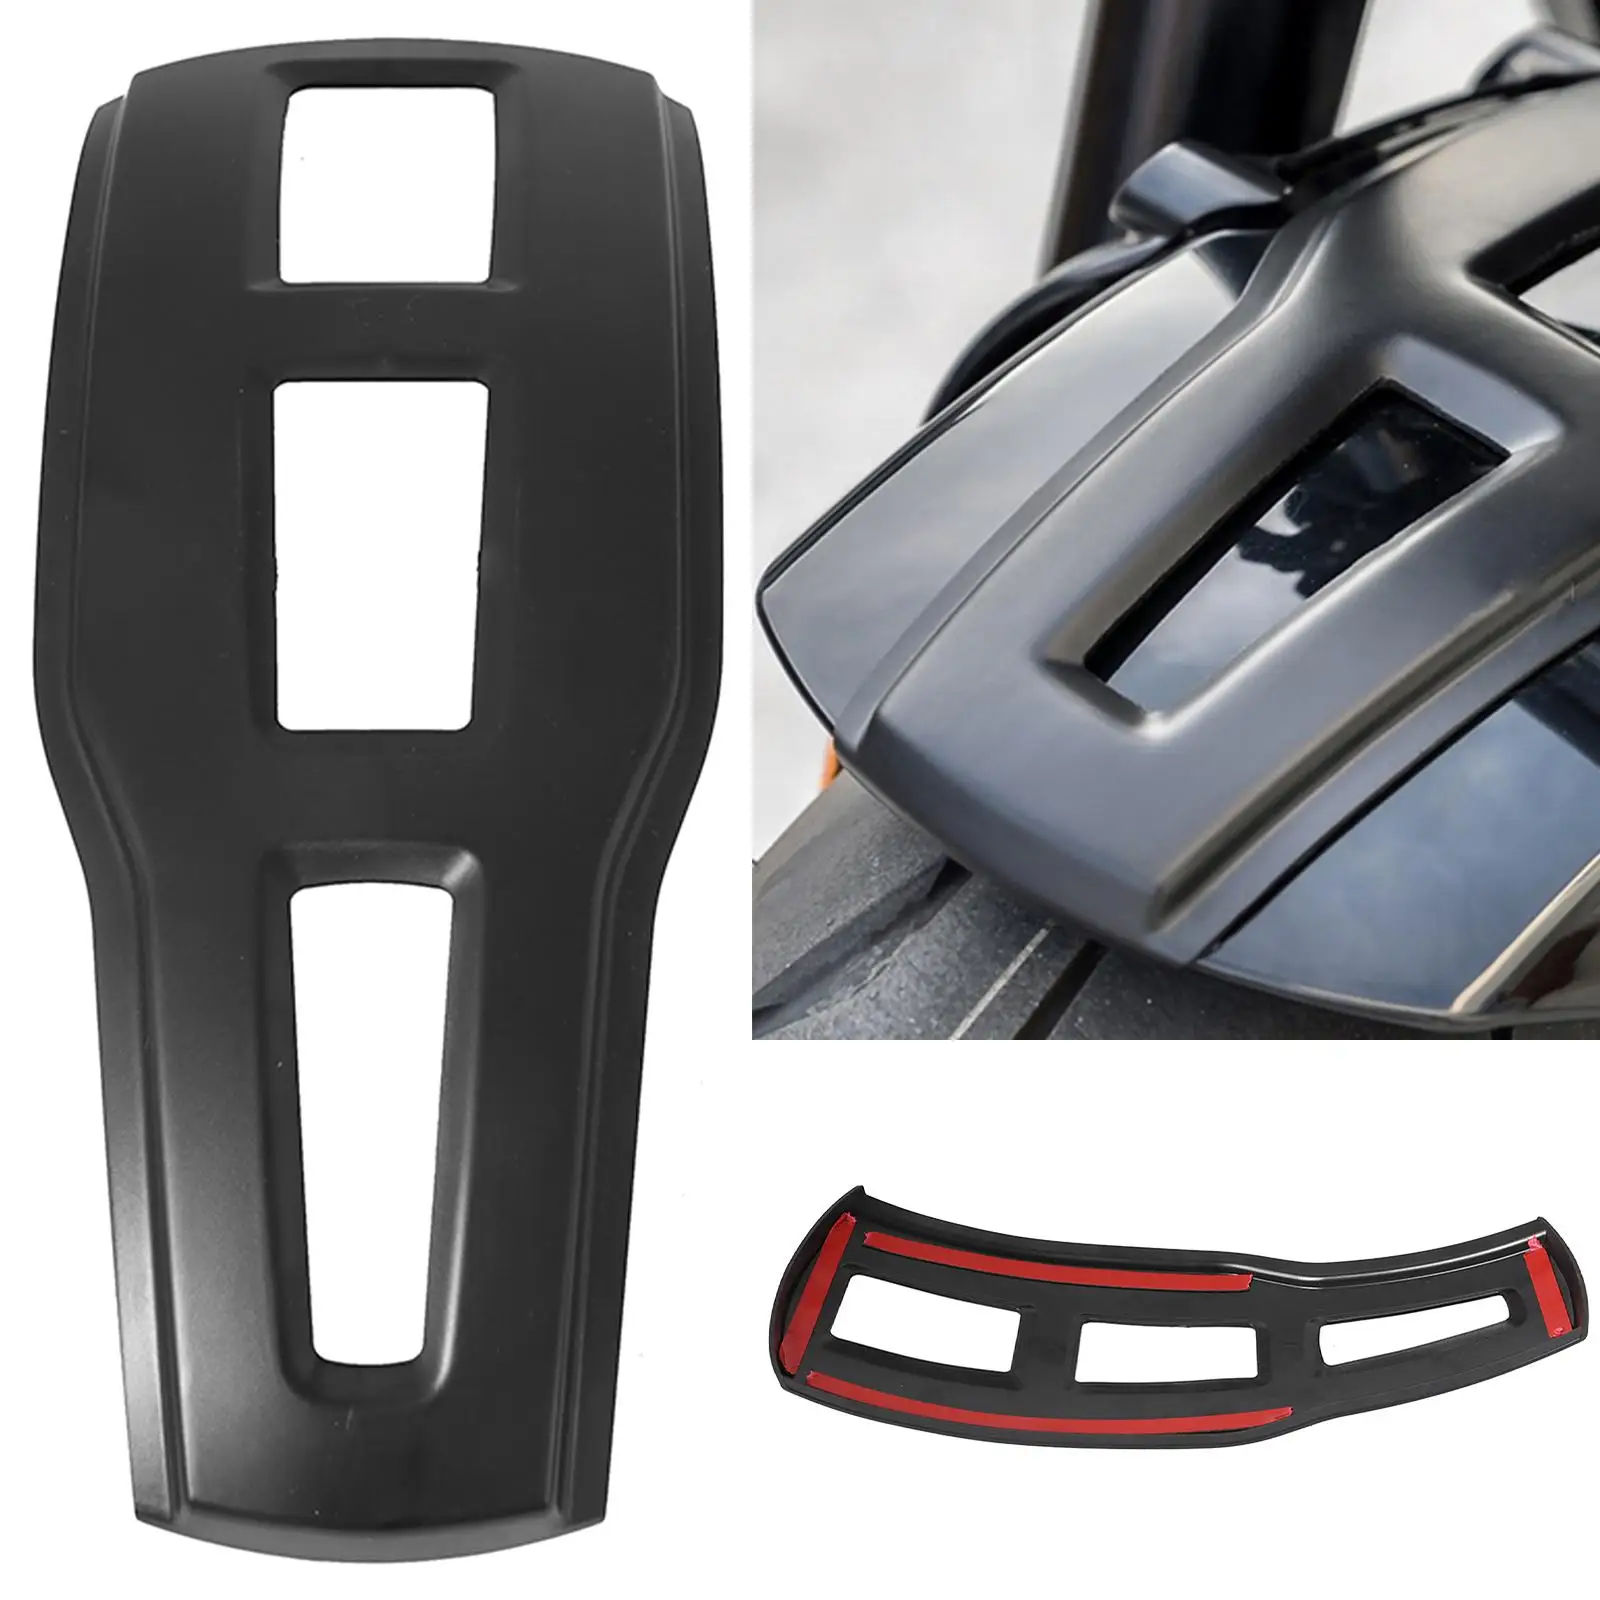 ABS Front Guard Cover Fits for   S1250 Rh 1250S  